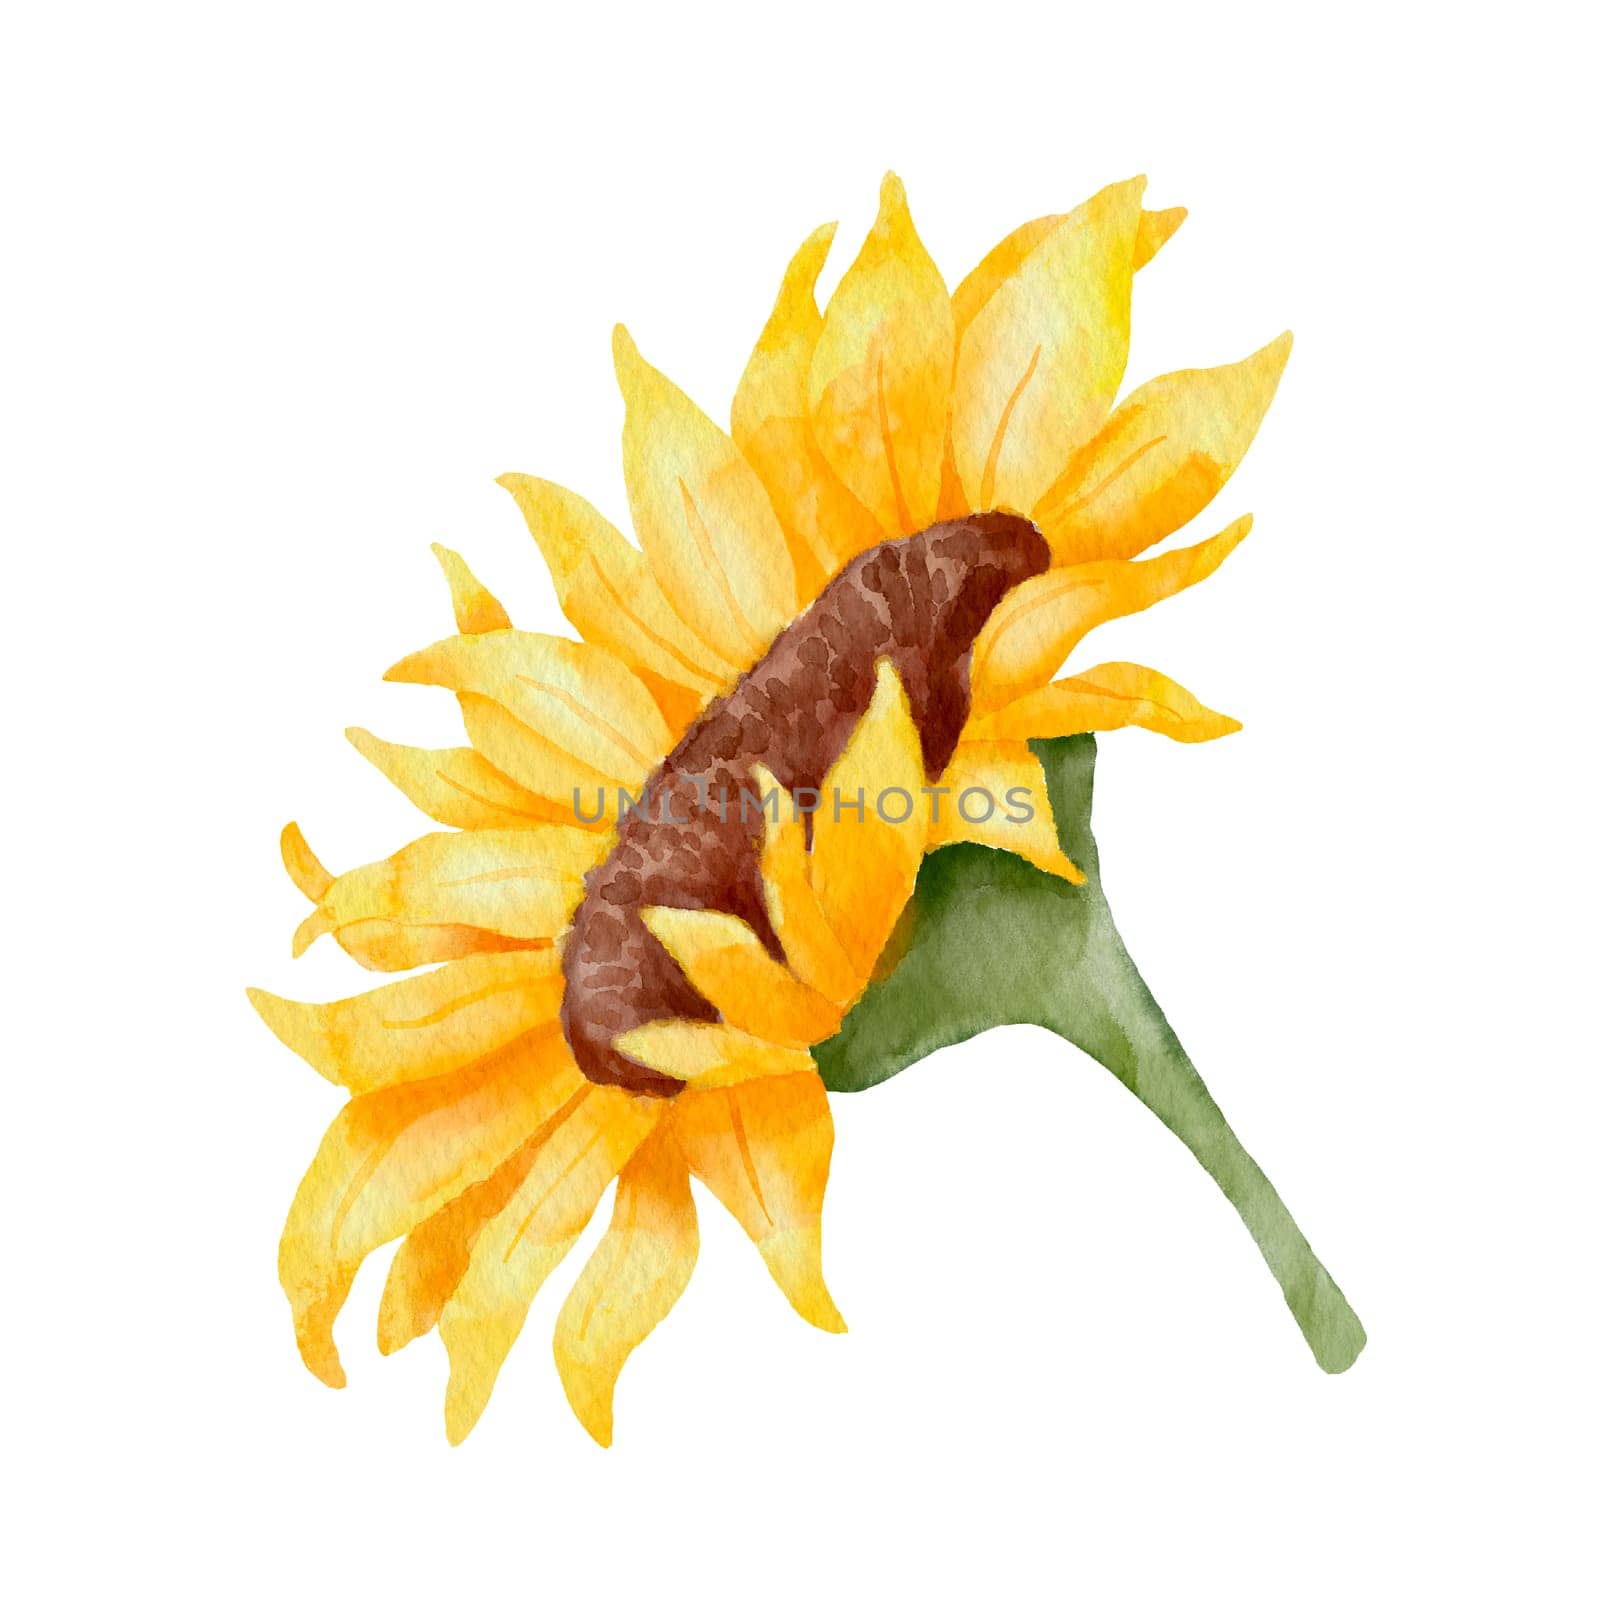 Watercolor sunflower. Colorful botanical hand drawn flower illustration isolated on white background